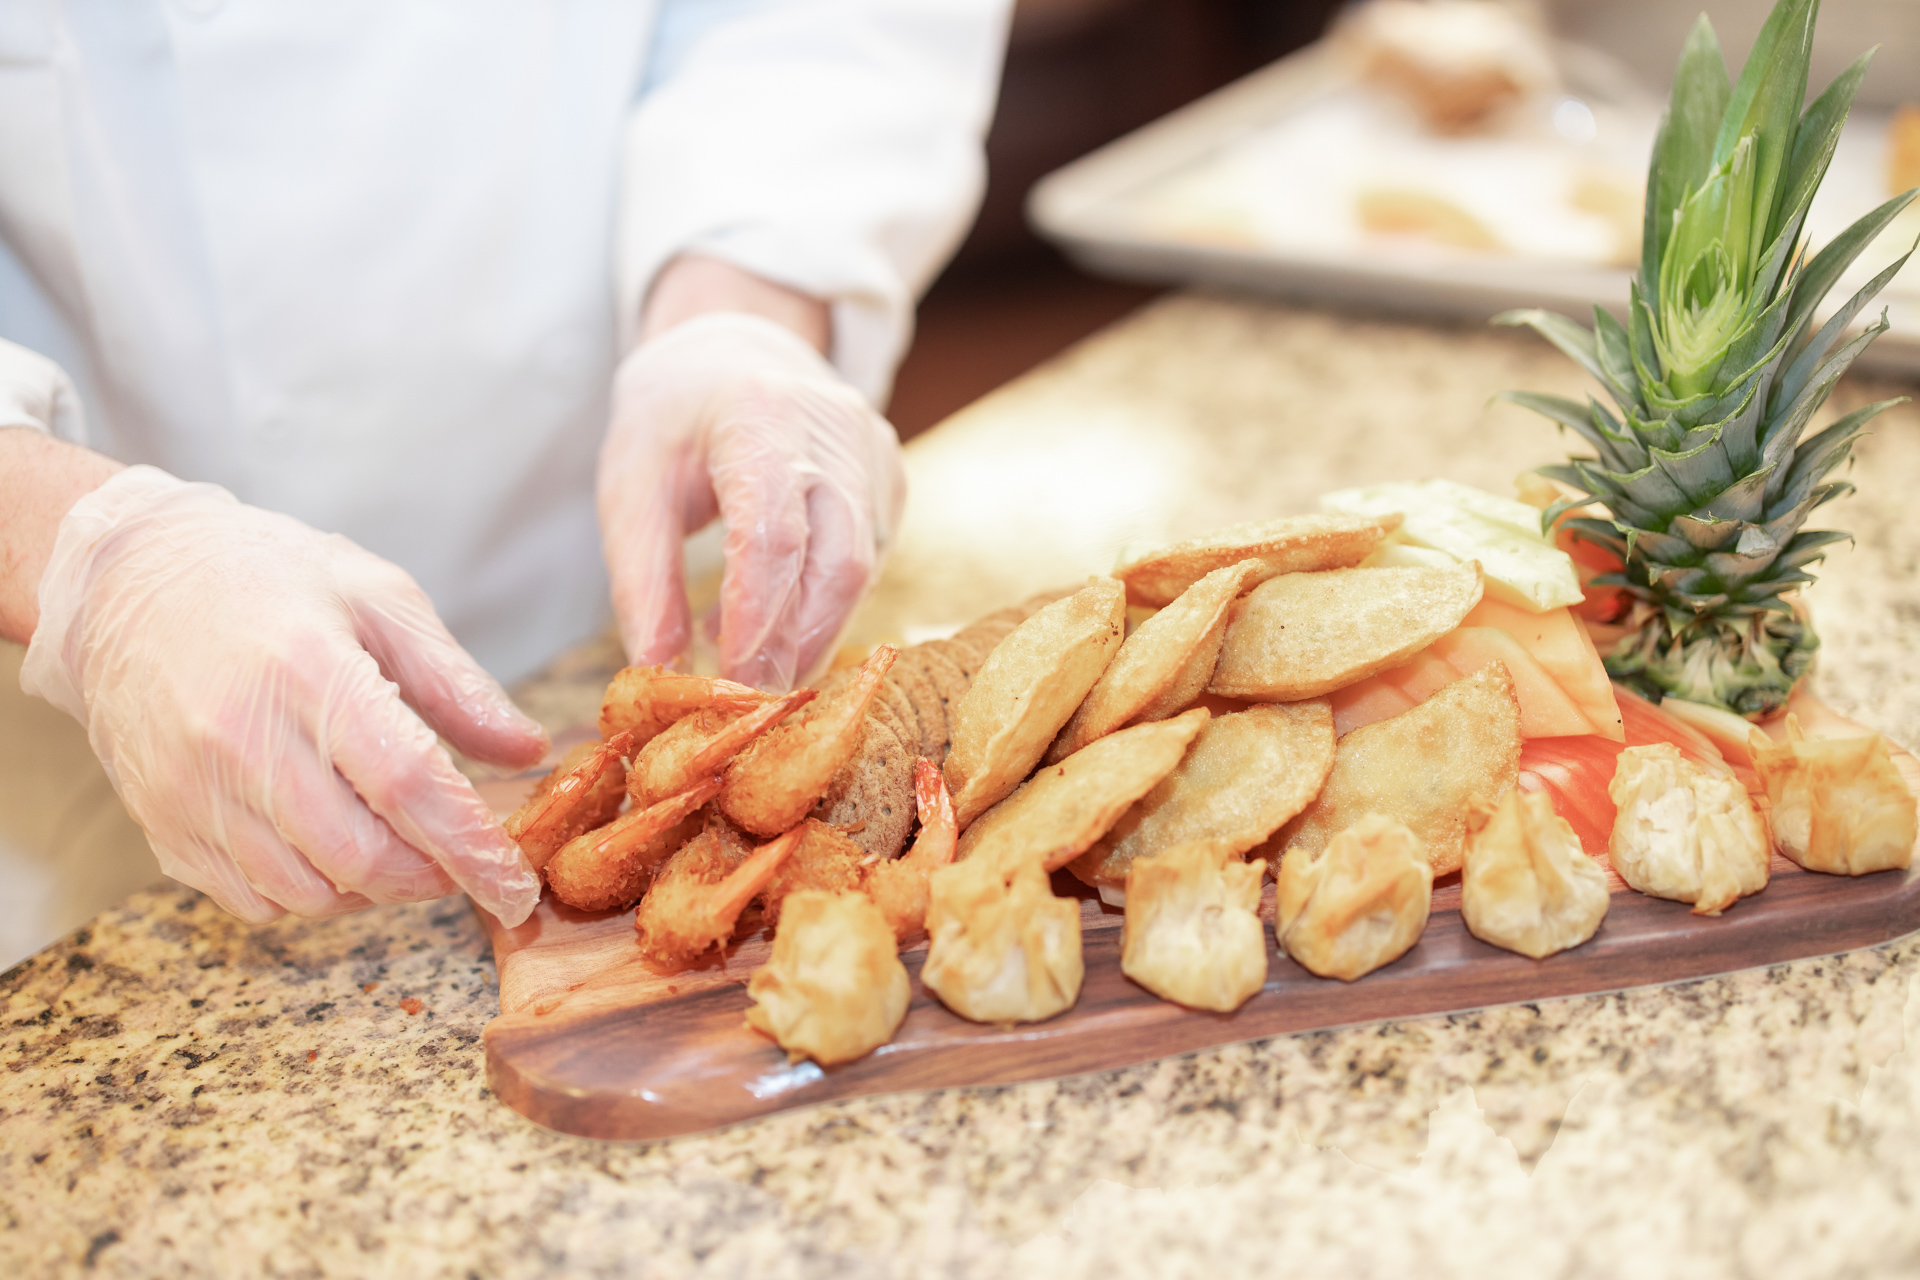 A chef is preparing a board of food decorated with pineapple, shrimp, and wontons